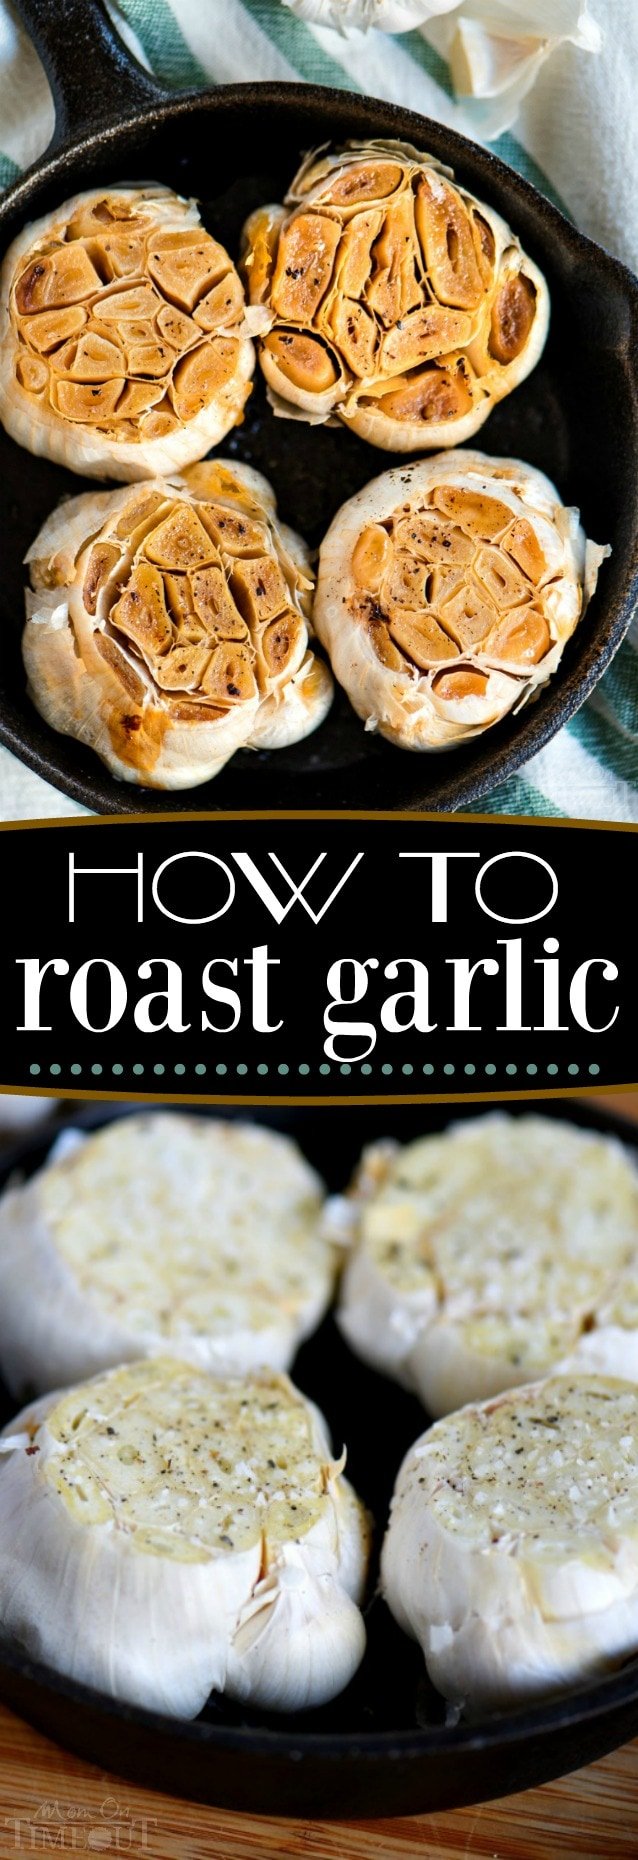 Roasted garlic is one of my favorite ingredients in soups and dips. If you've ever wondered how to roast garlic - you've come to the right place! Roasted garlic adds tremendous flavor and depth to any dish. Roasting the garlic really mellows out the garlic and makes it sweet and delicious. // Mom On Timeout #roasted #garlic #roast #howto